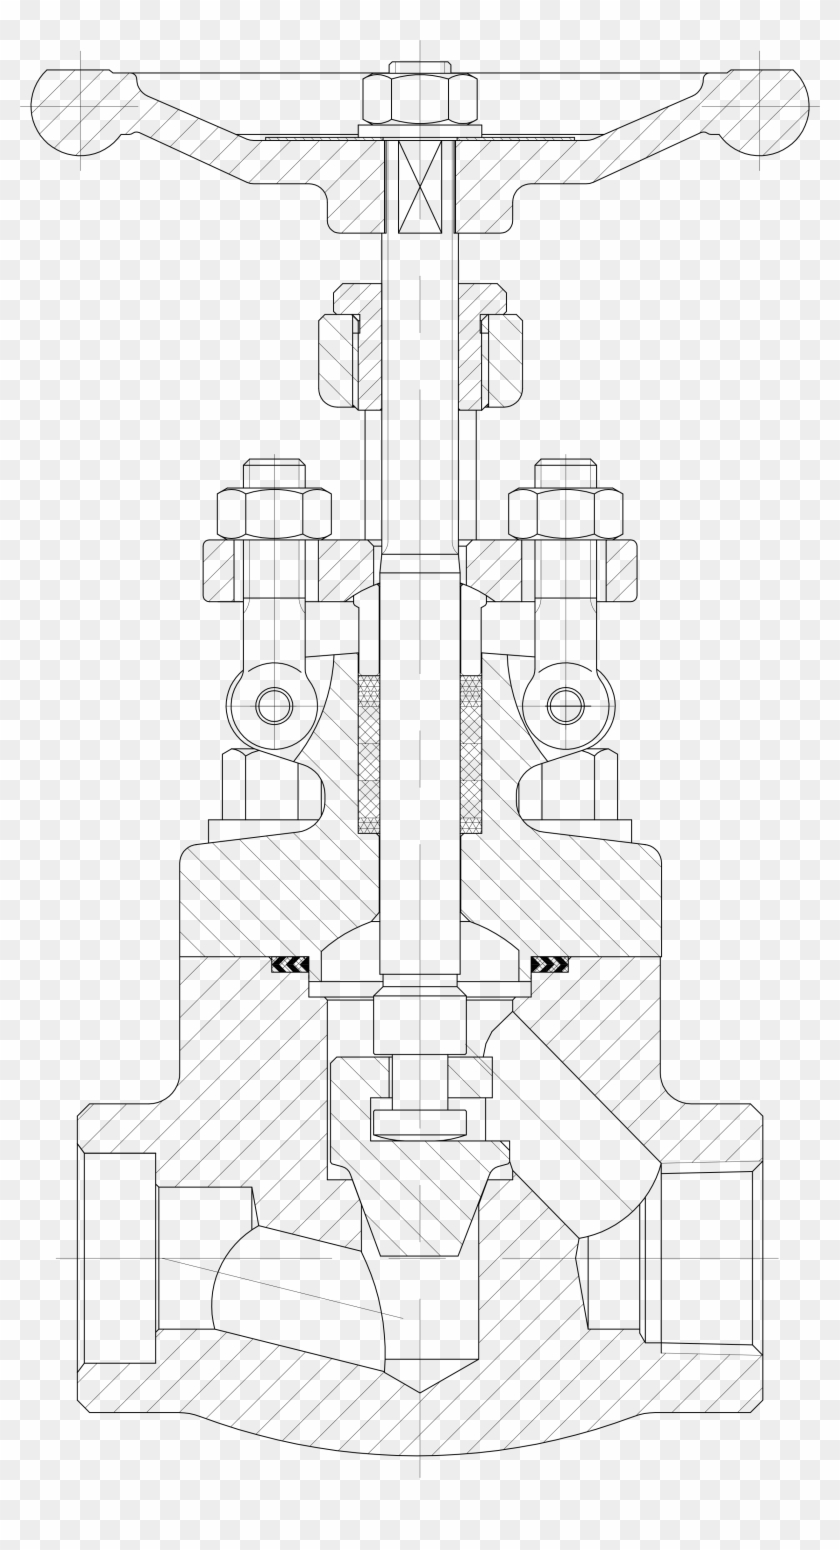 Also Available Per Nace Mr 0175, Nace Mr 0103, Iso - Technical Drawing Clipart #3662207